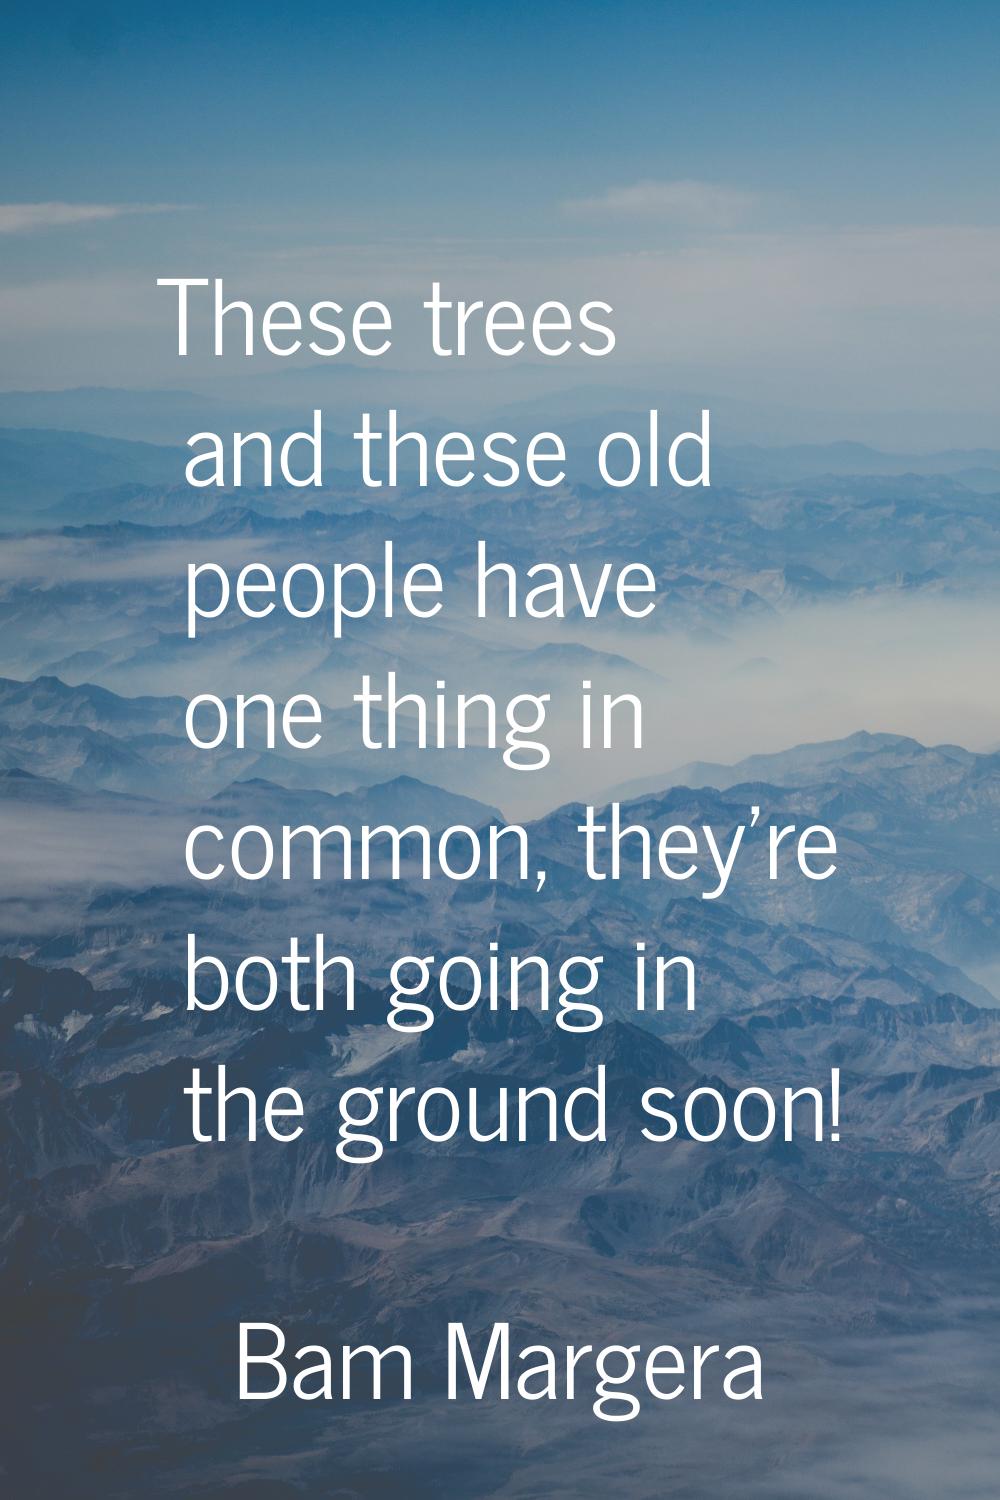 These trees and these old people have one thing in common, they're both going in the ground soon!